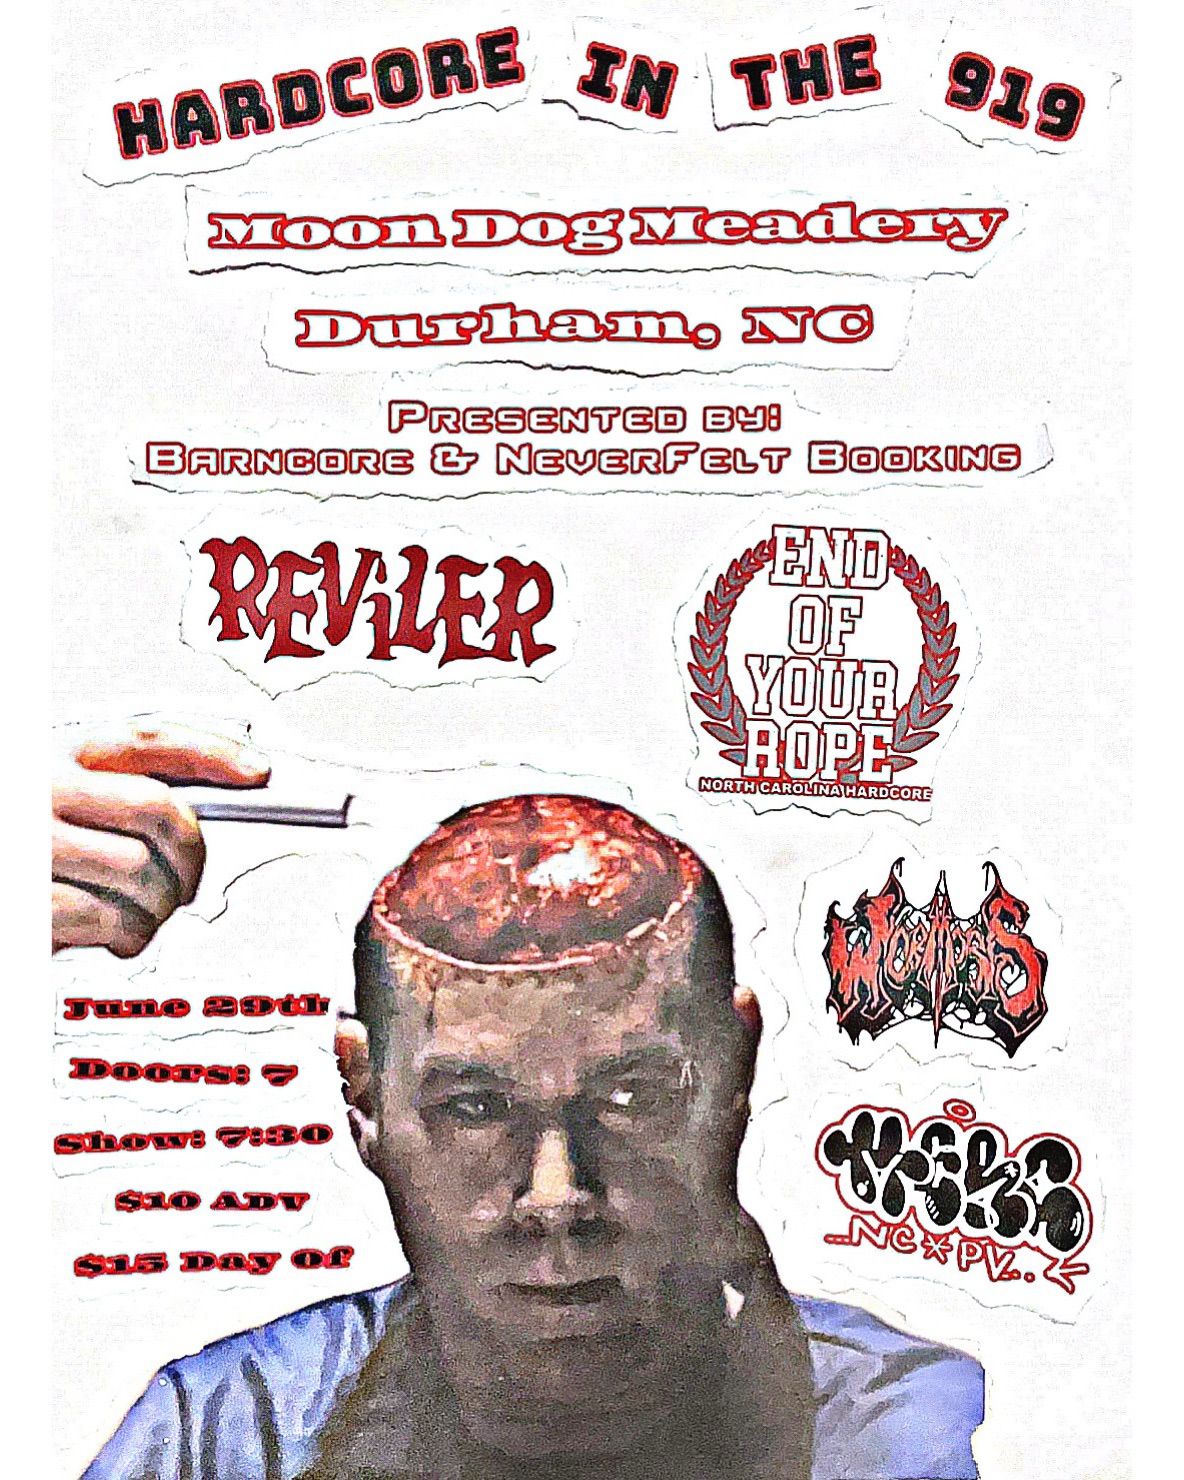 Reviler\/\/End of your Rope\/\/Wormosis\/\/Merc at MoonDog Meadery in Durham NC